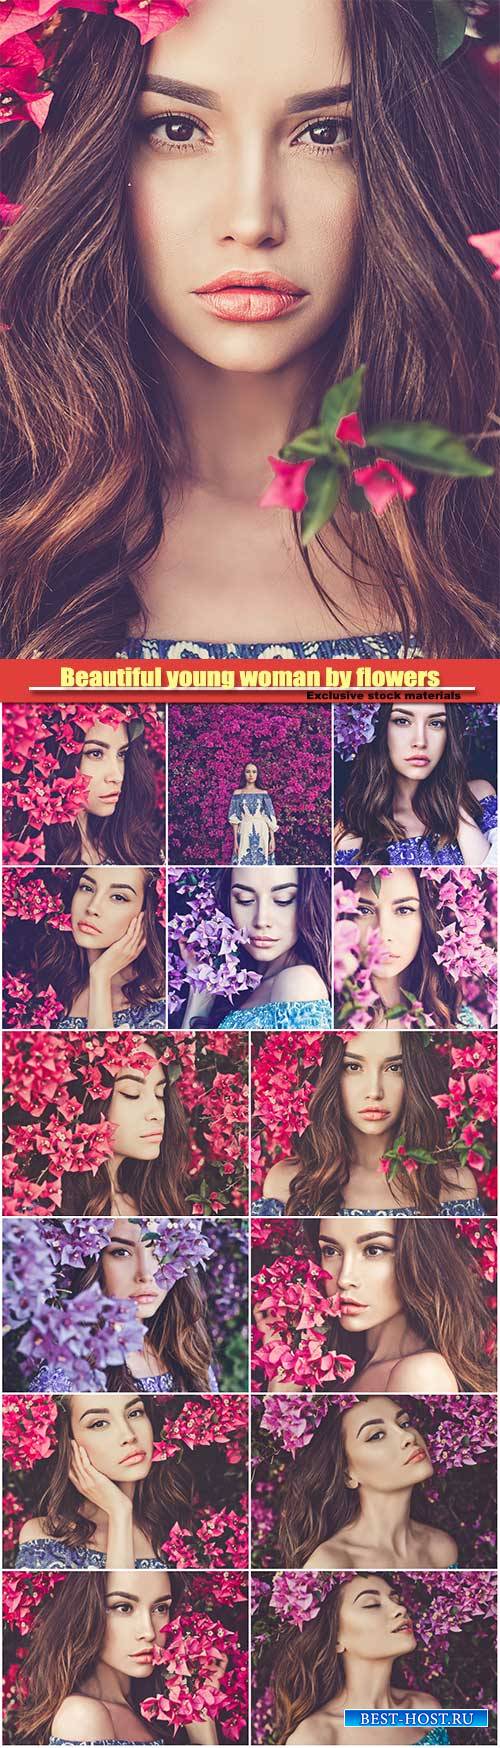 Beautiful young woman surrounded by flowers